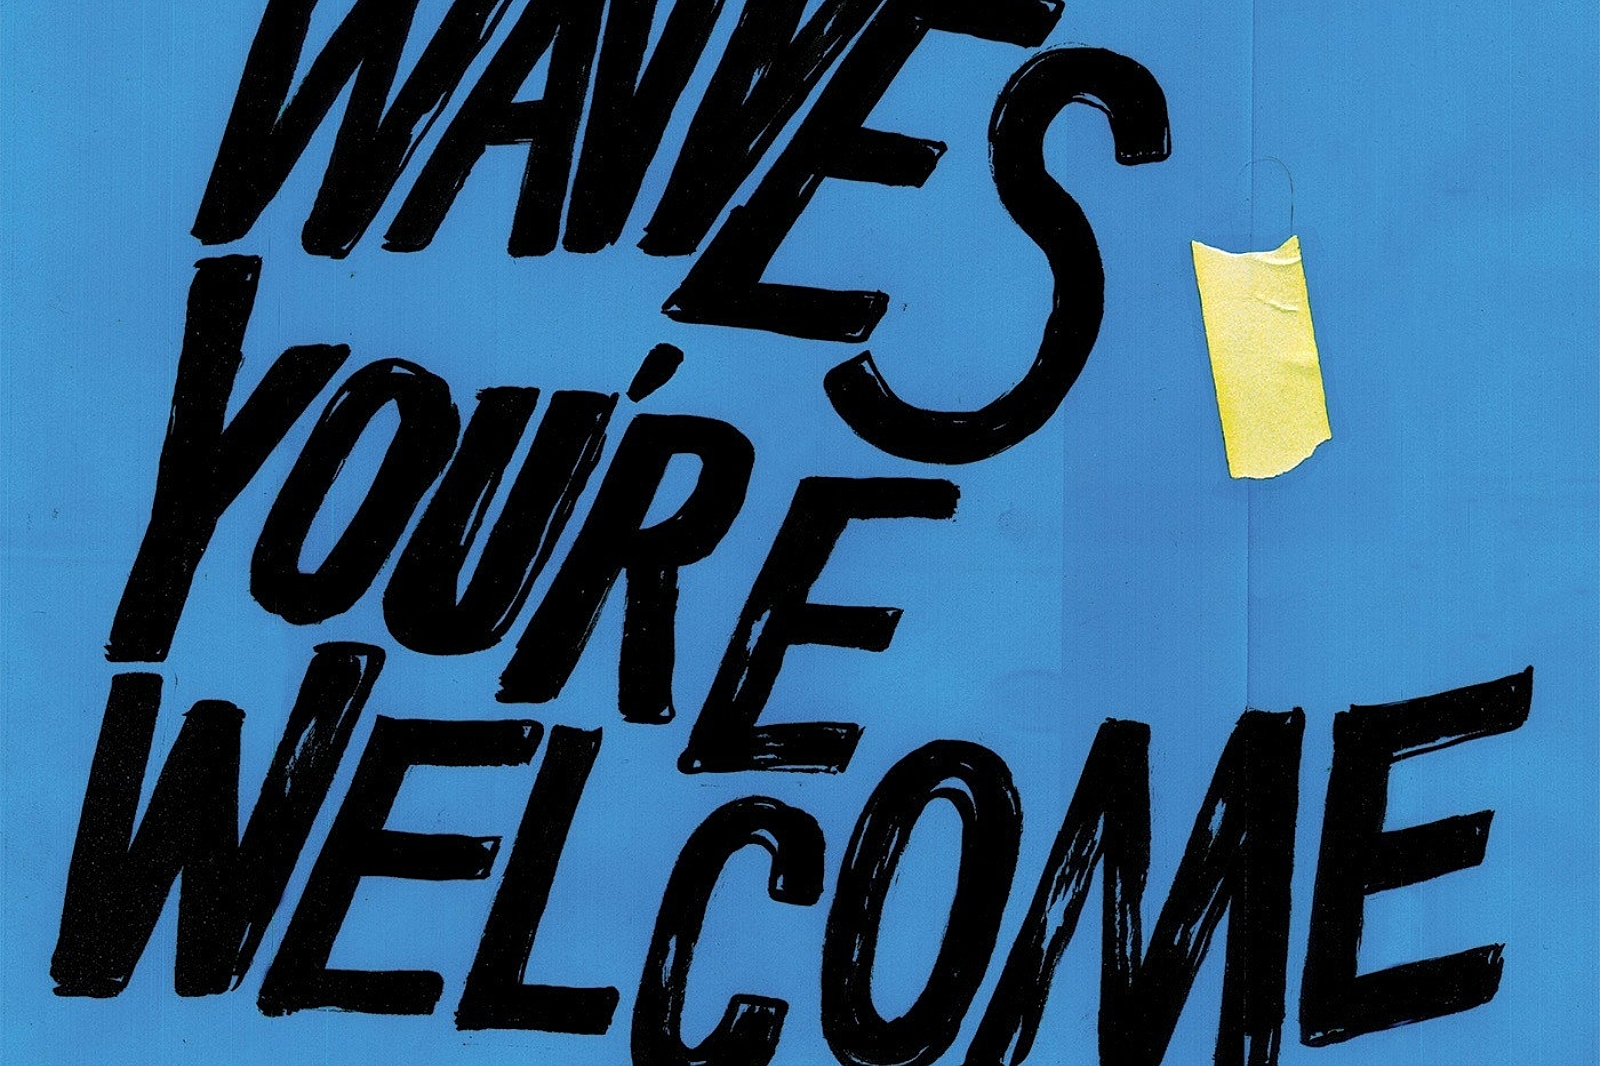 Wavves - You’re Welcome